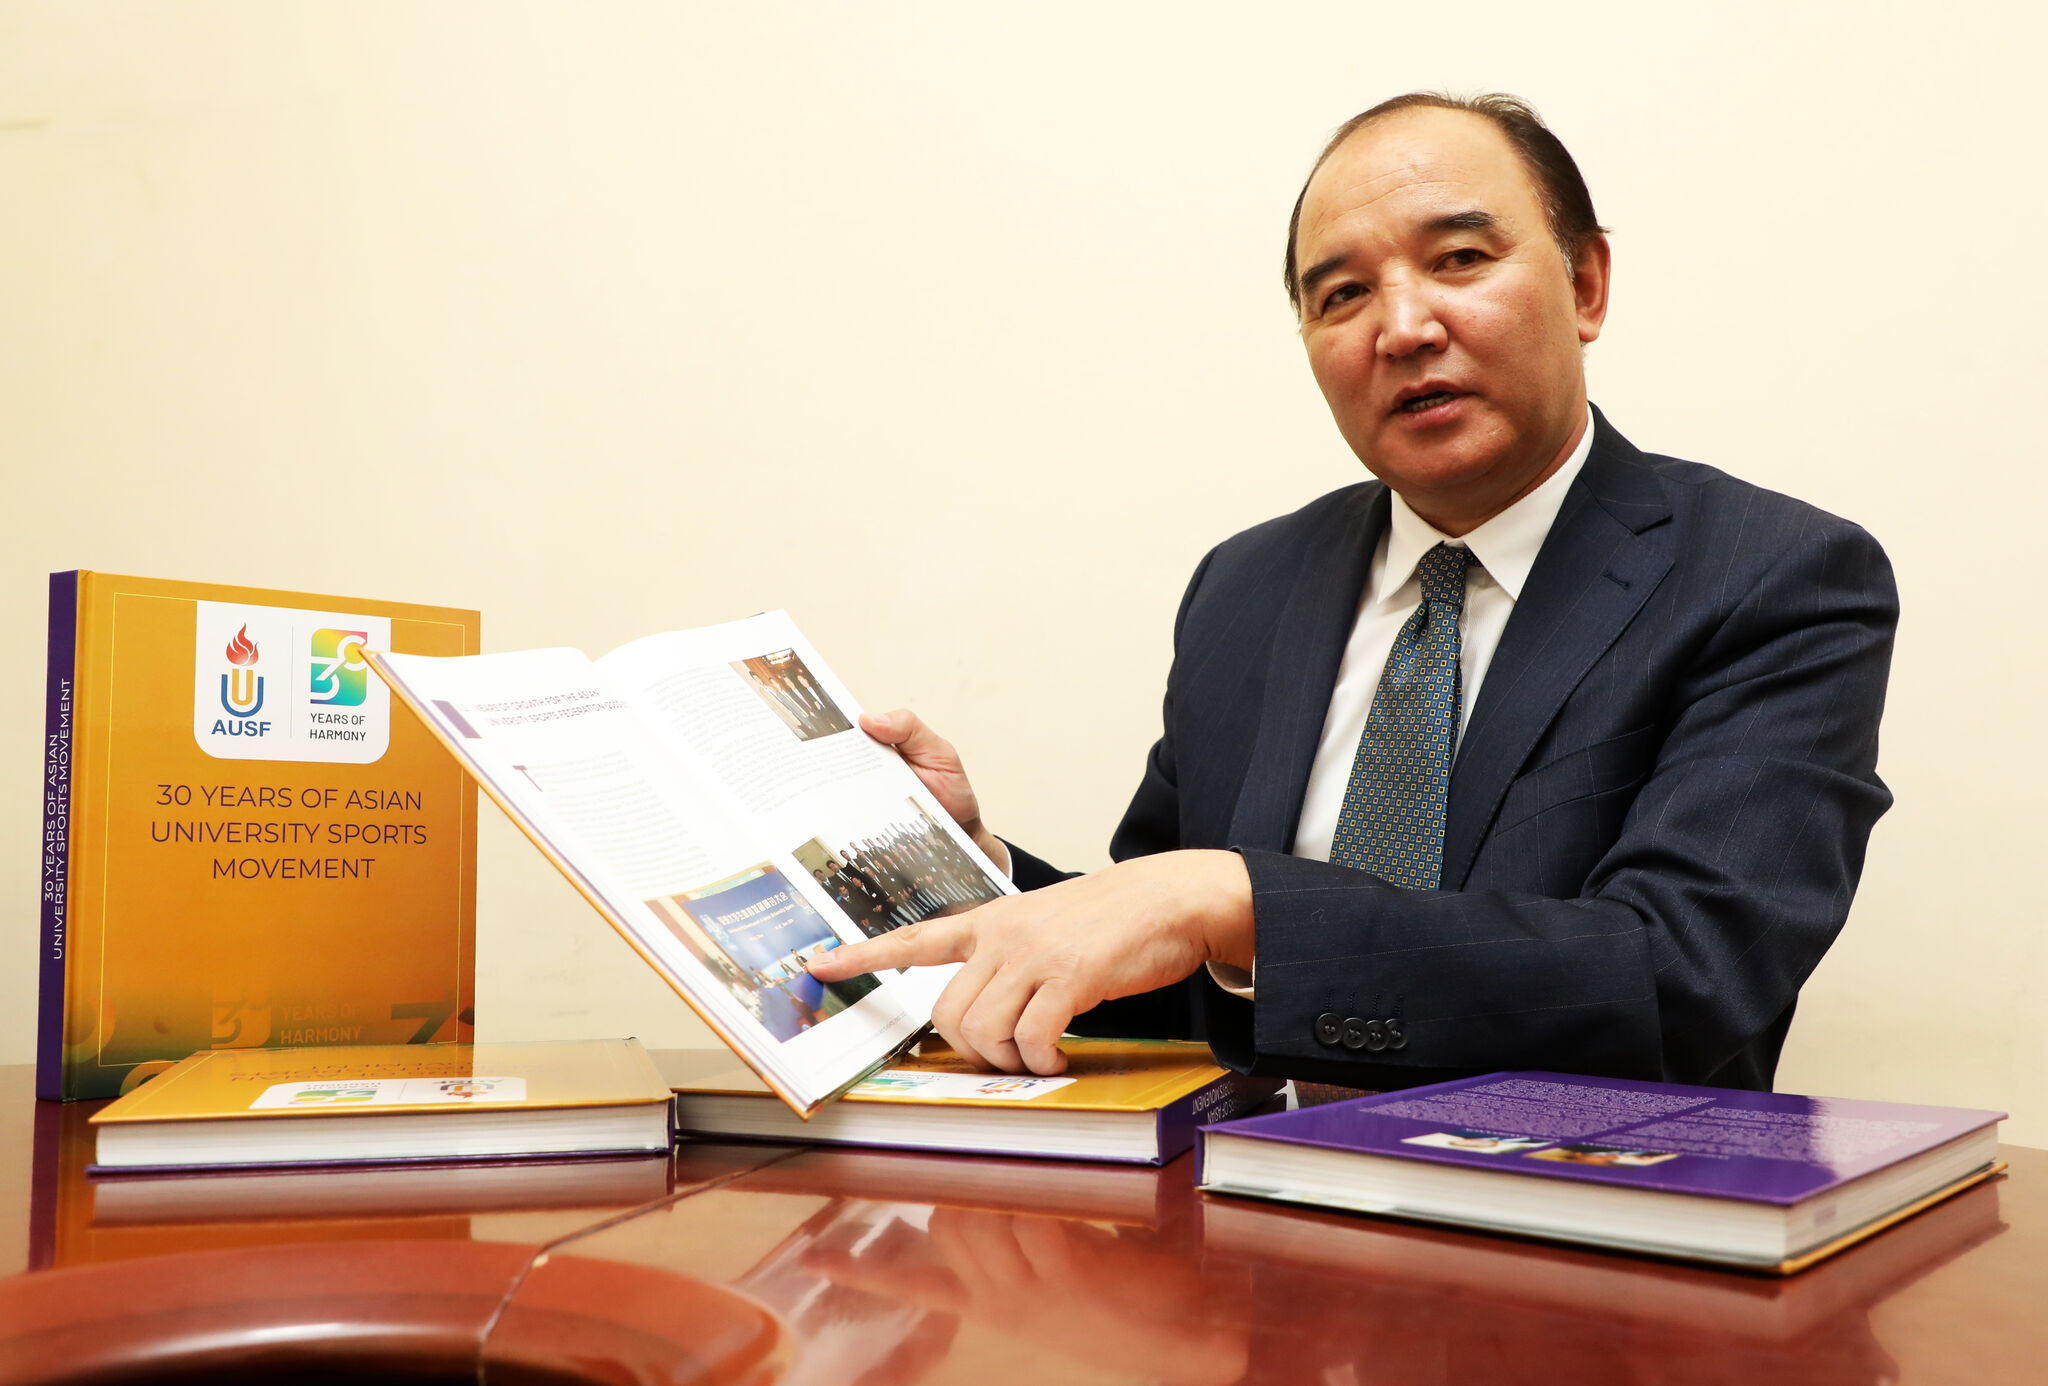 Dr Dorjsuren Jargalsaikhan, the Asian University Sports Federation vice-president, pictured with the book he co-wrote marking the organisation's 30th anniversary ©MSSF